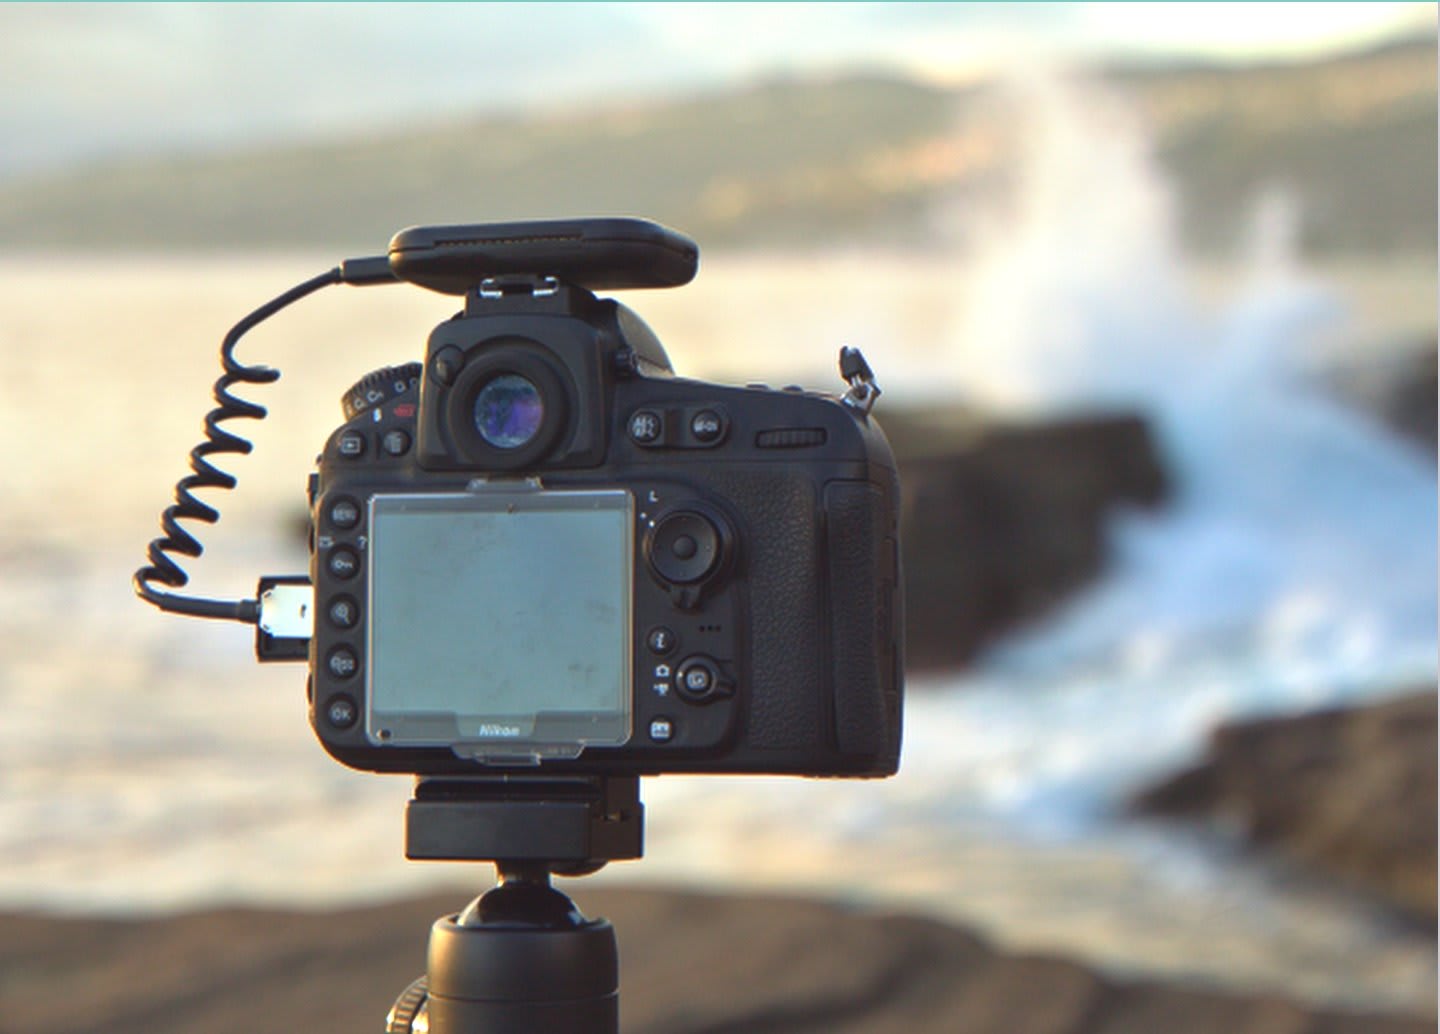 Meet Arsenal, the intelligent assistant for your DSLR or mirrorless camera.